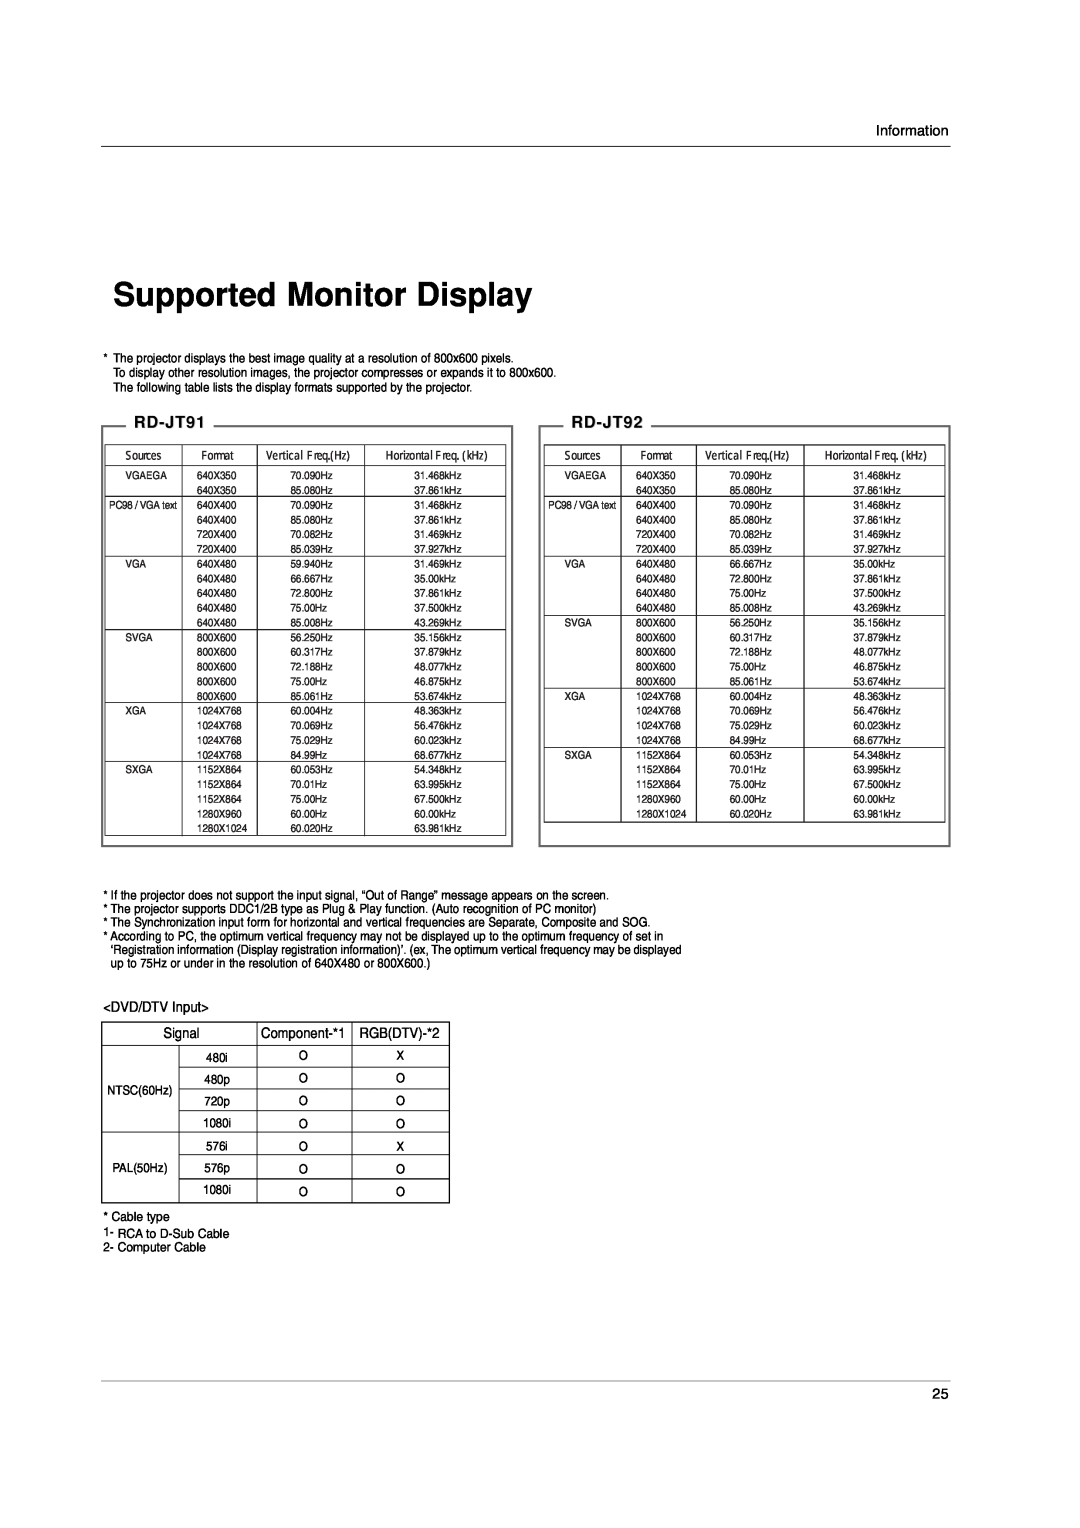 LG Electronics RD-JT91 owner manual Supported Monitor Display, RD-JT92, Sources, Format 